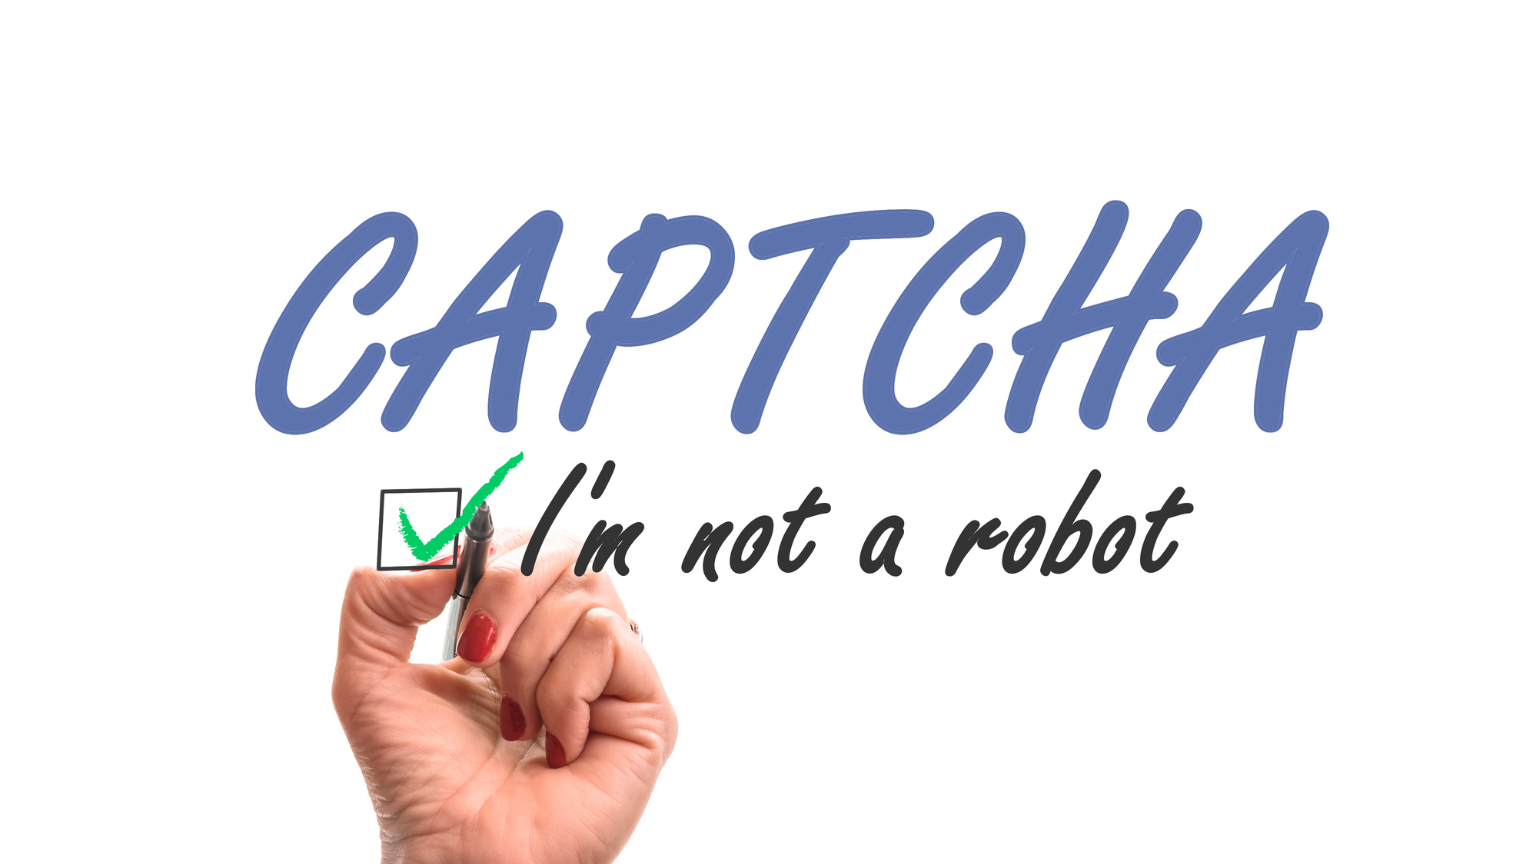 takian.ir captcha breaking services with human solvers 1